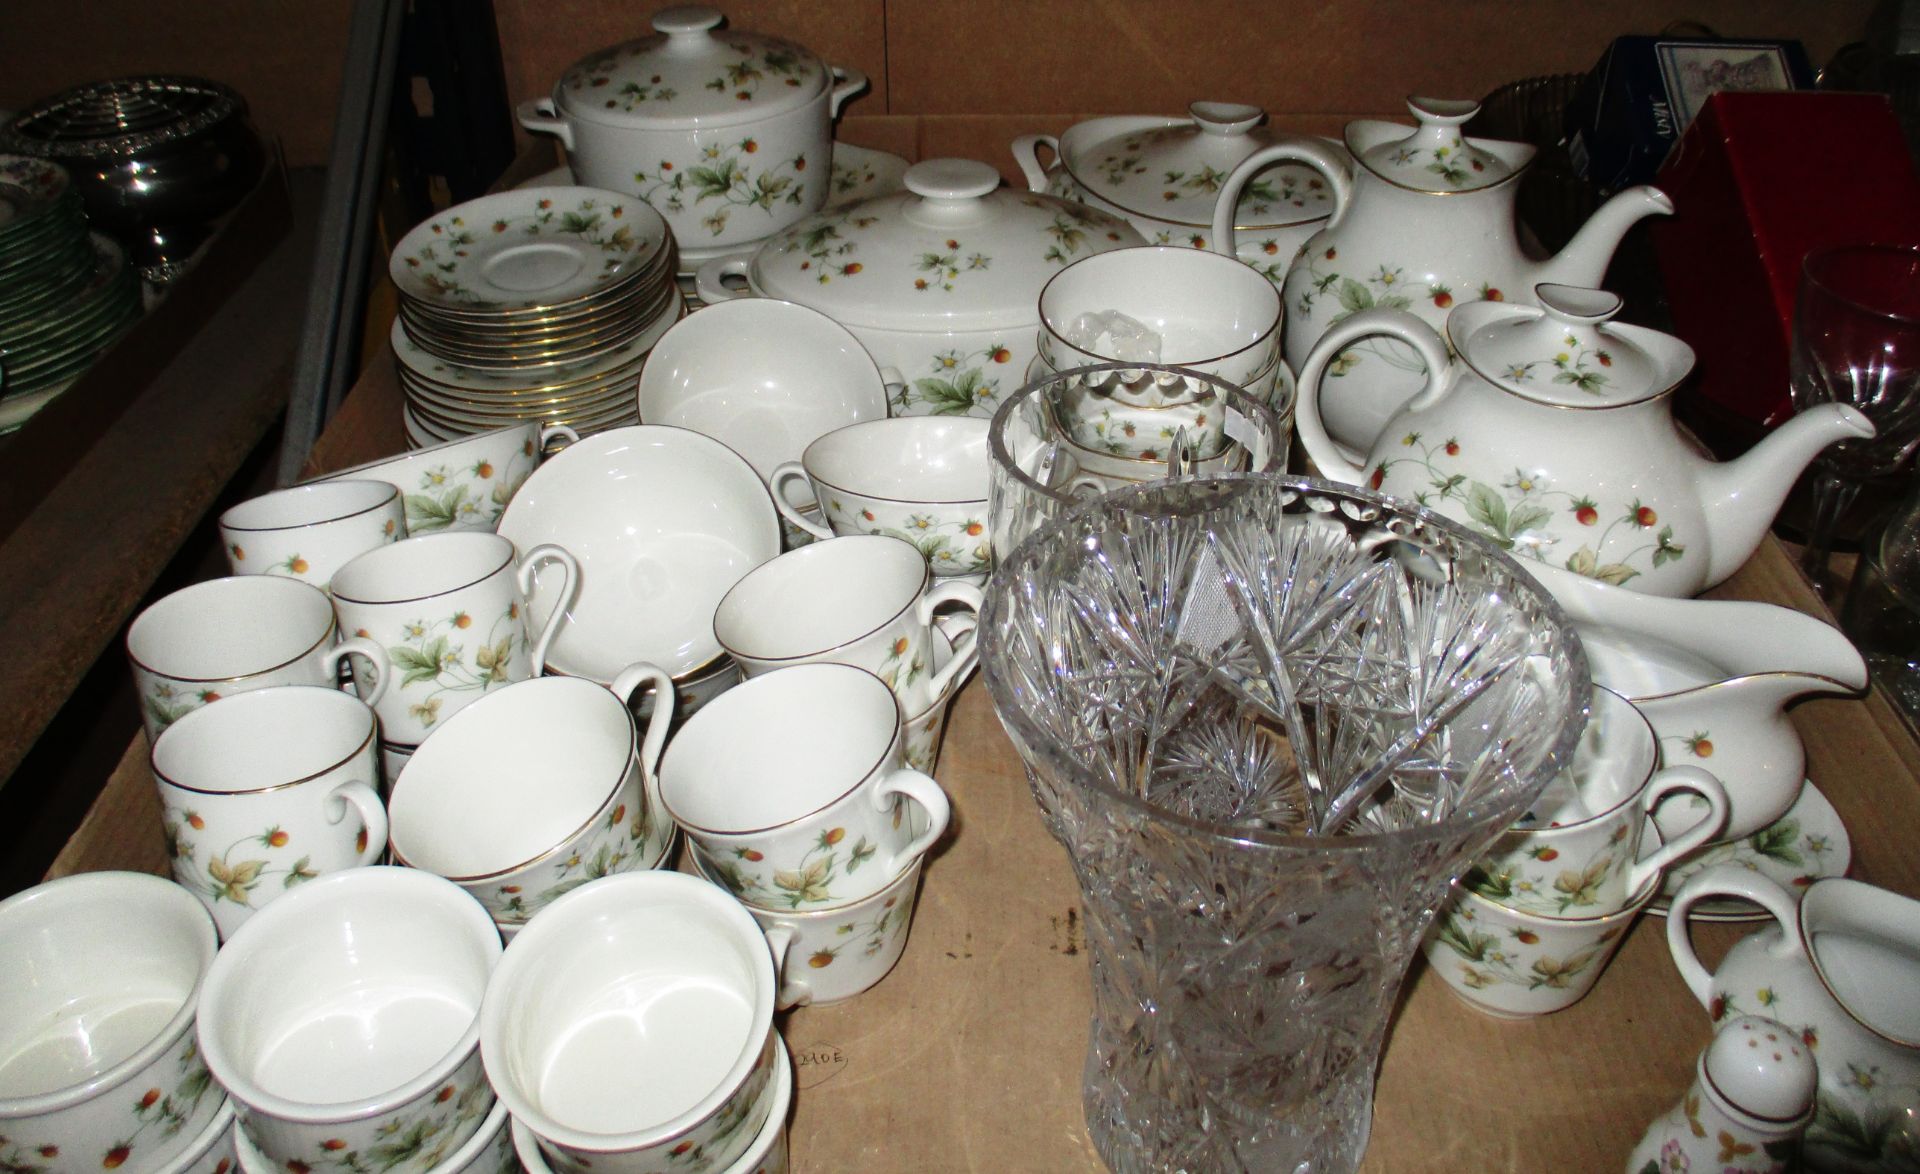 73 x piece Royal Doulton "Strawberry Cream" patterned tea/dinner service and two cut glass vases